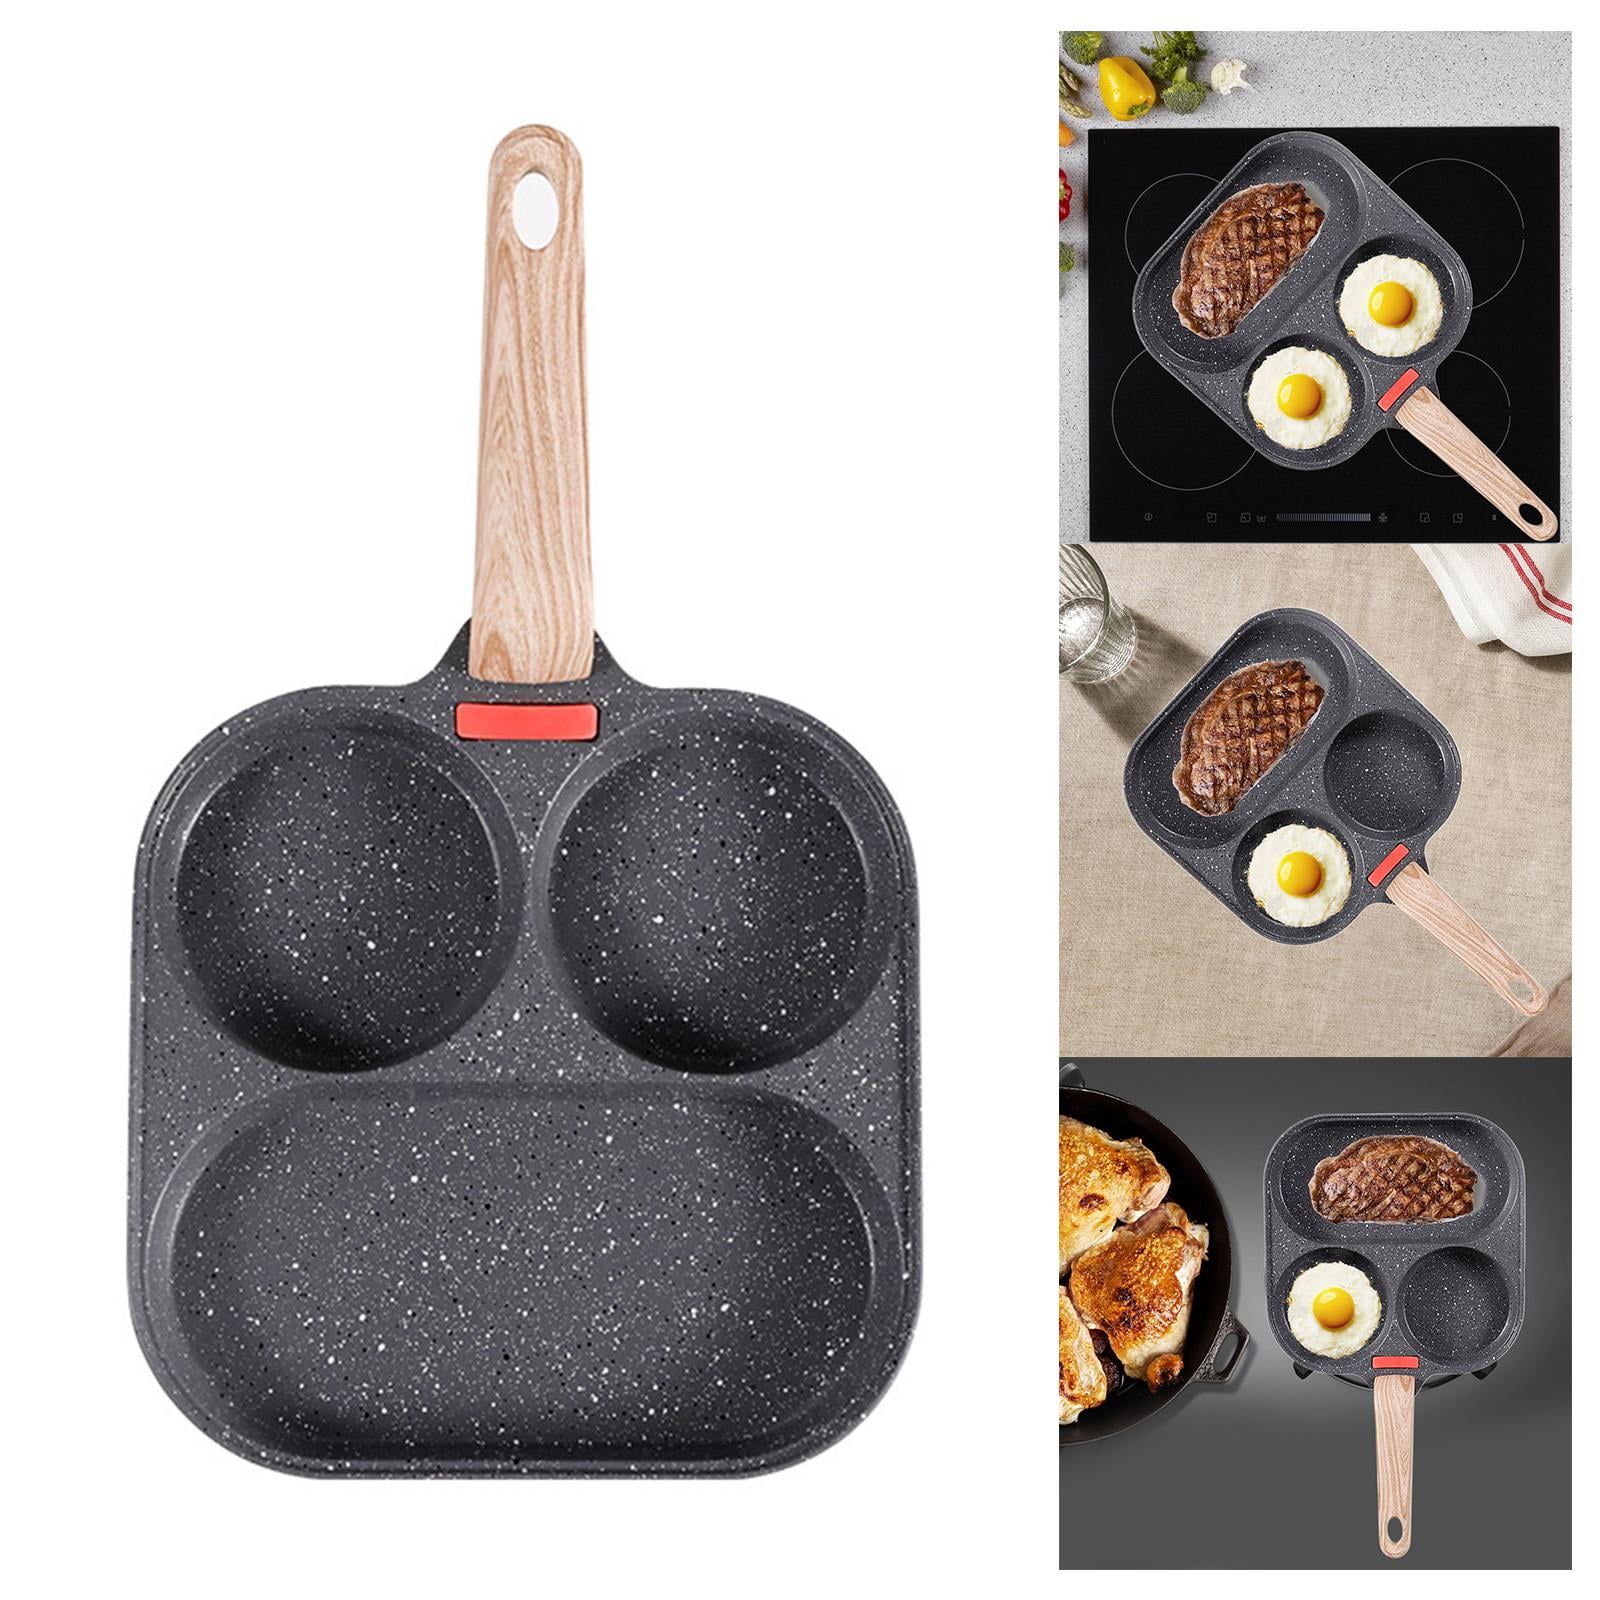 Egg Frying Pan, Divided Grill Frying Pan Egg Cooker Pan Kitchen Cooking  Tool 3 in 1 Nonstick Pan, for Baking Frying Cooking Steak Breakfast violet